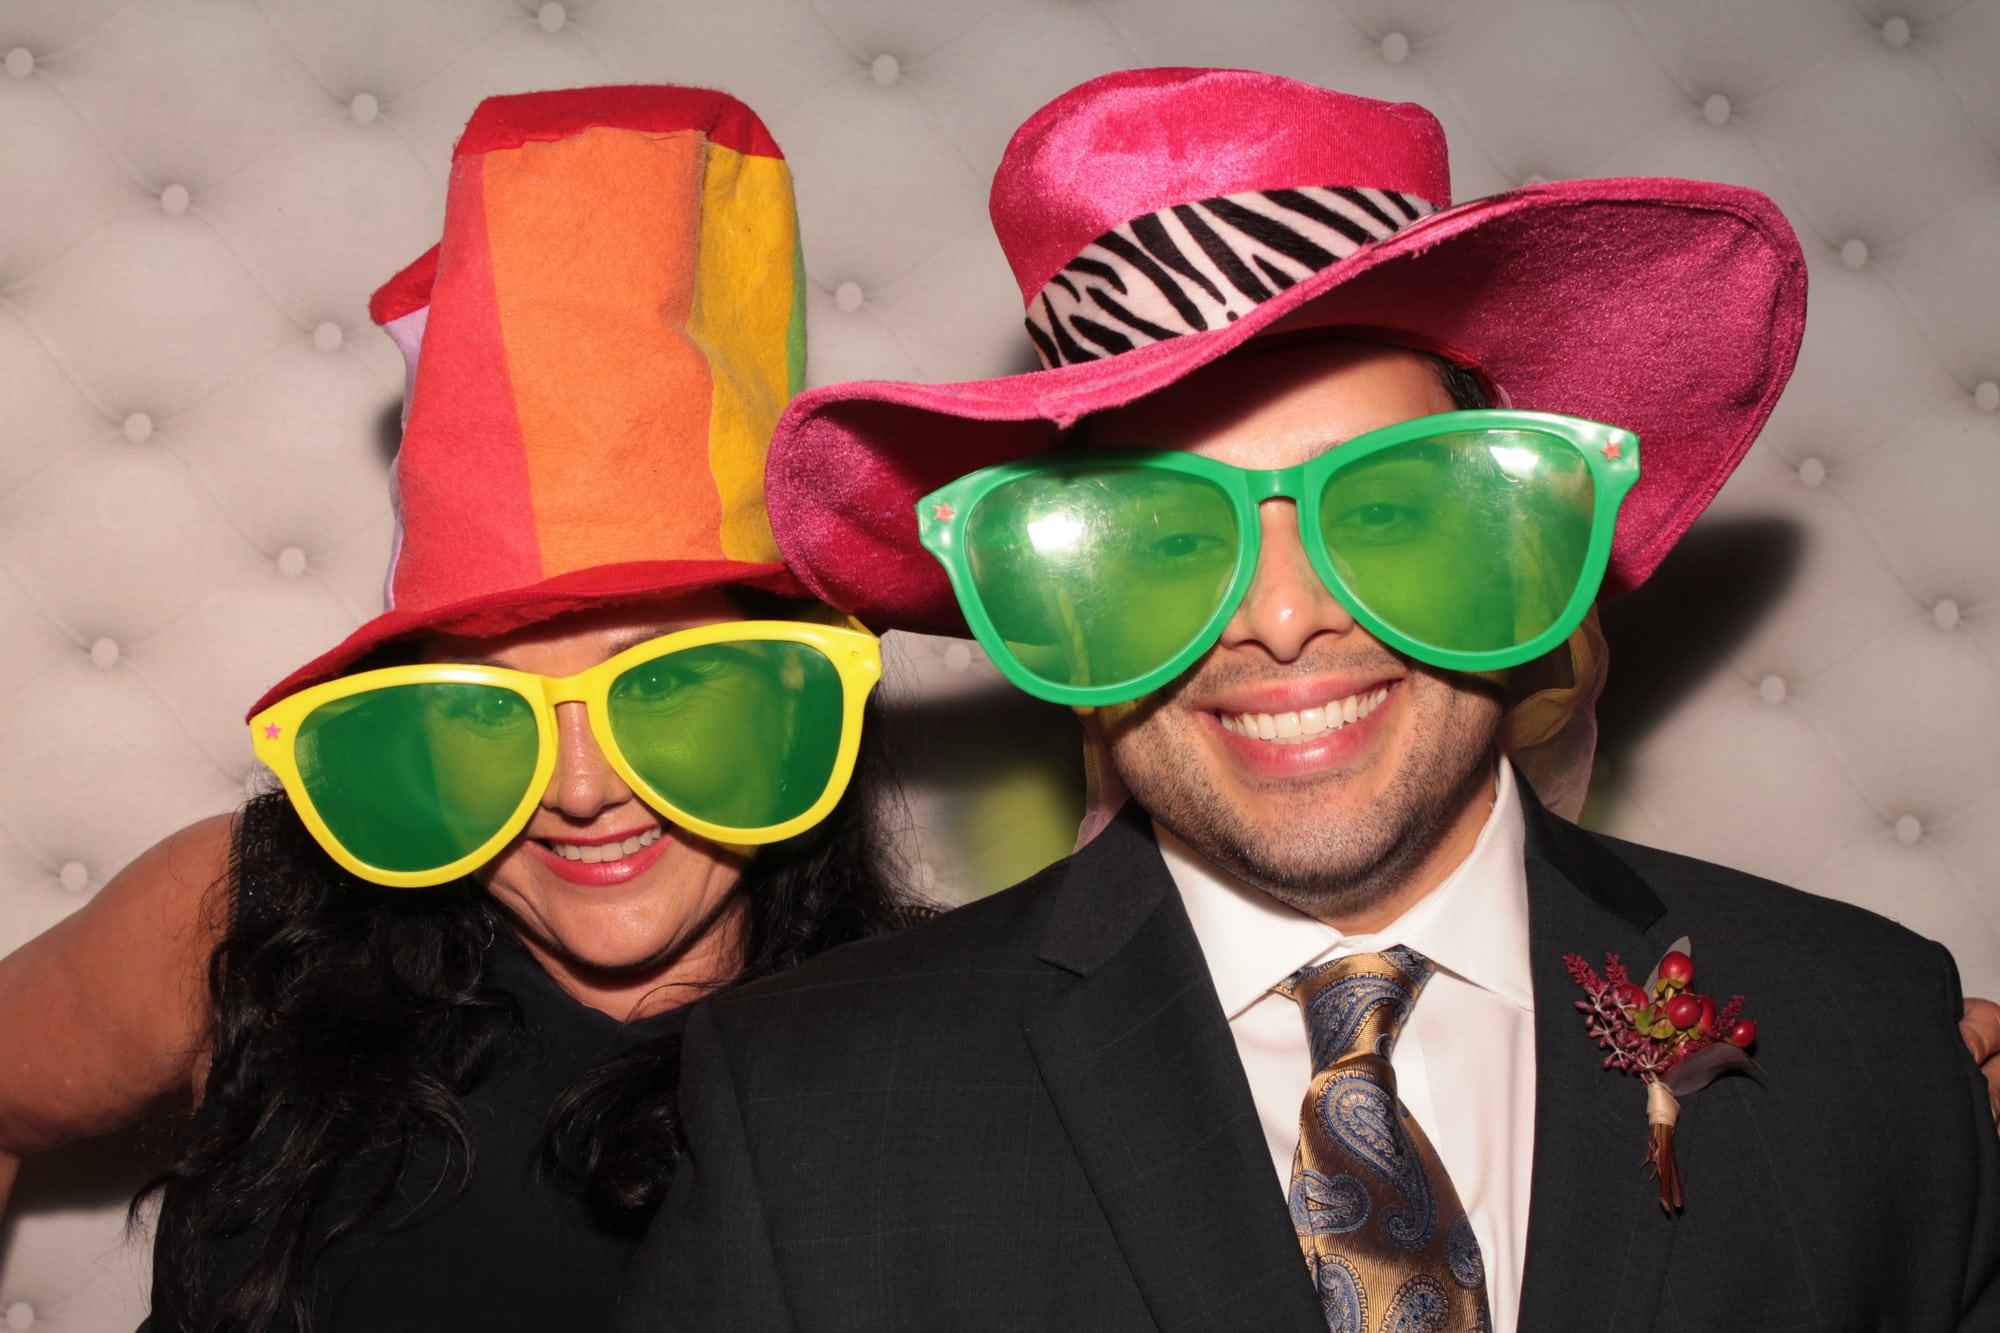 Photo-Booth-Rental-Wedding-Reception-Party-Celebration-Fun-No. 1-Props-LGBT-Affordable-Best-Austin